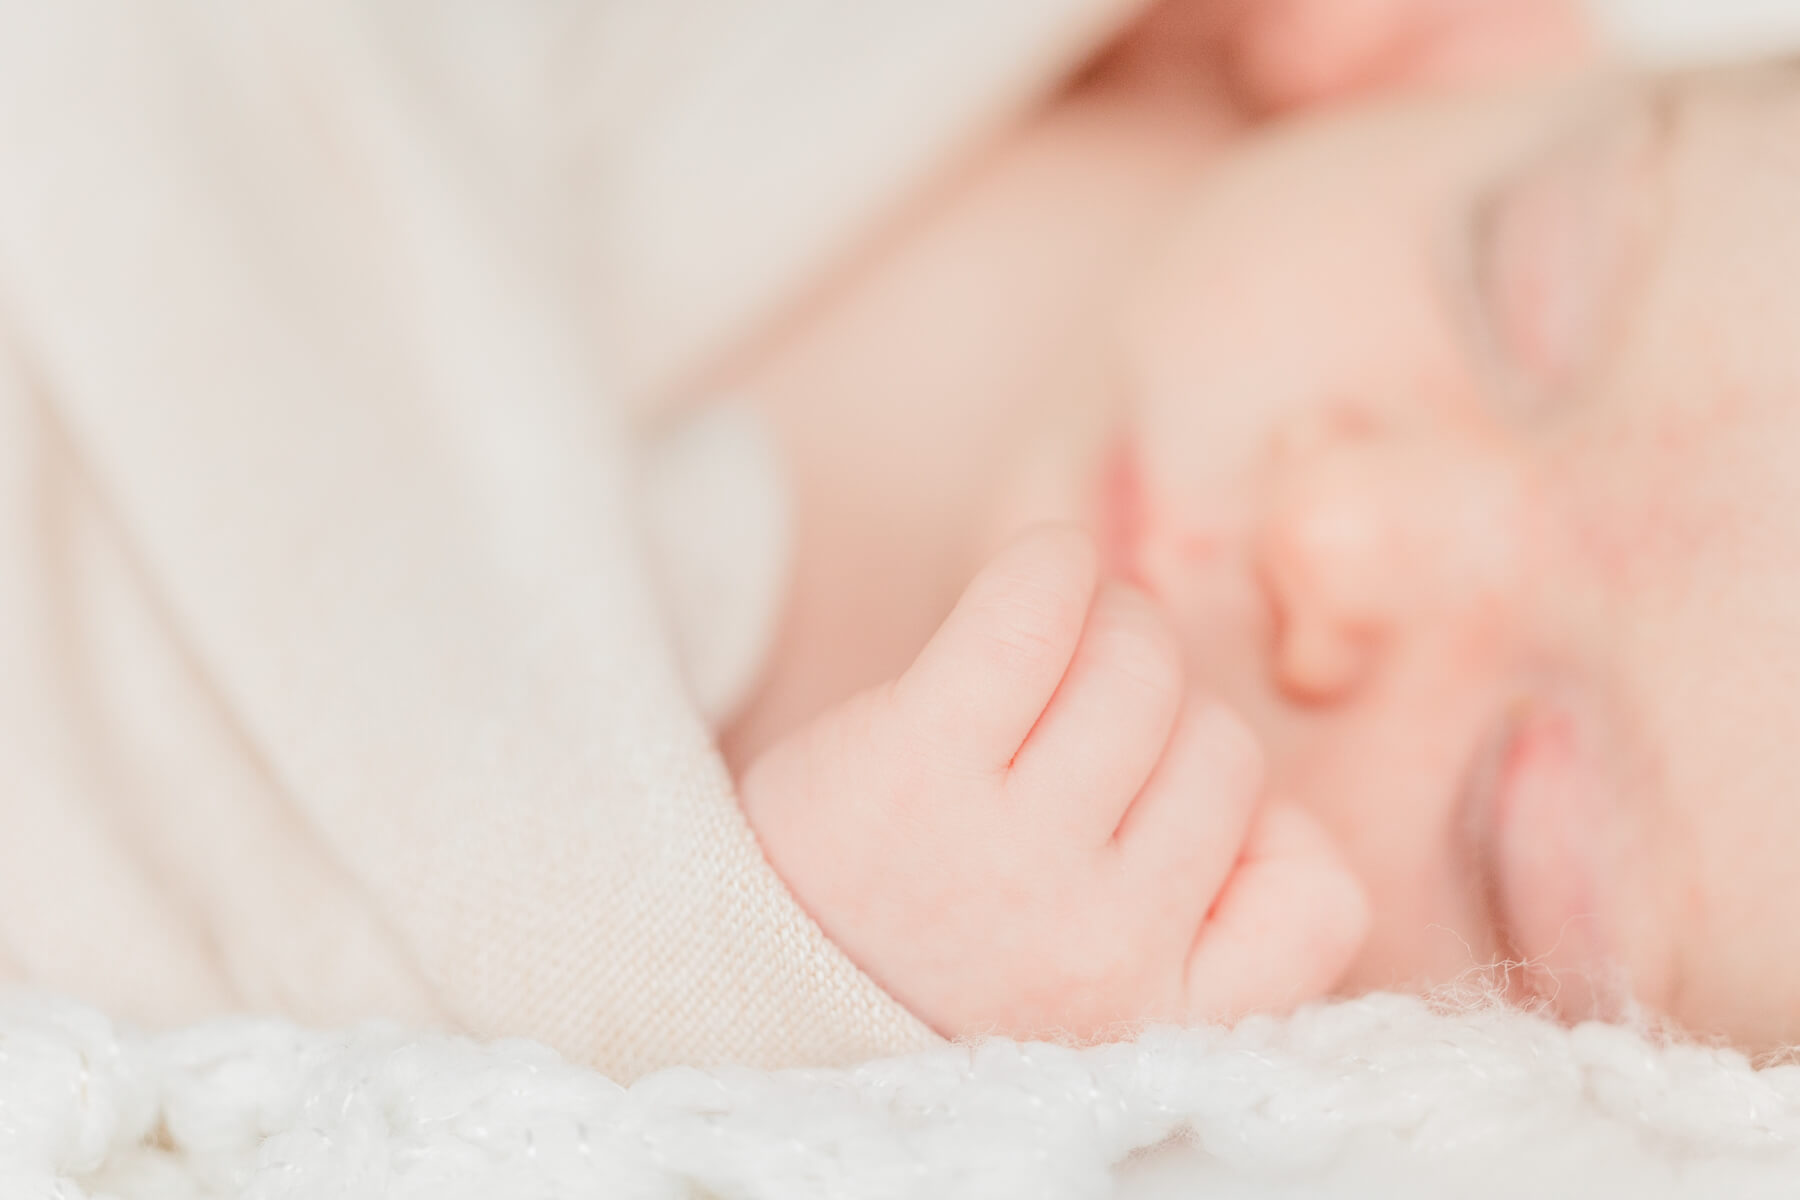 Details of a sleeping newborn baby's hand on a white bed and tan swaddle